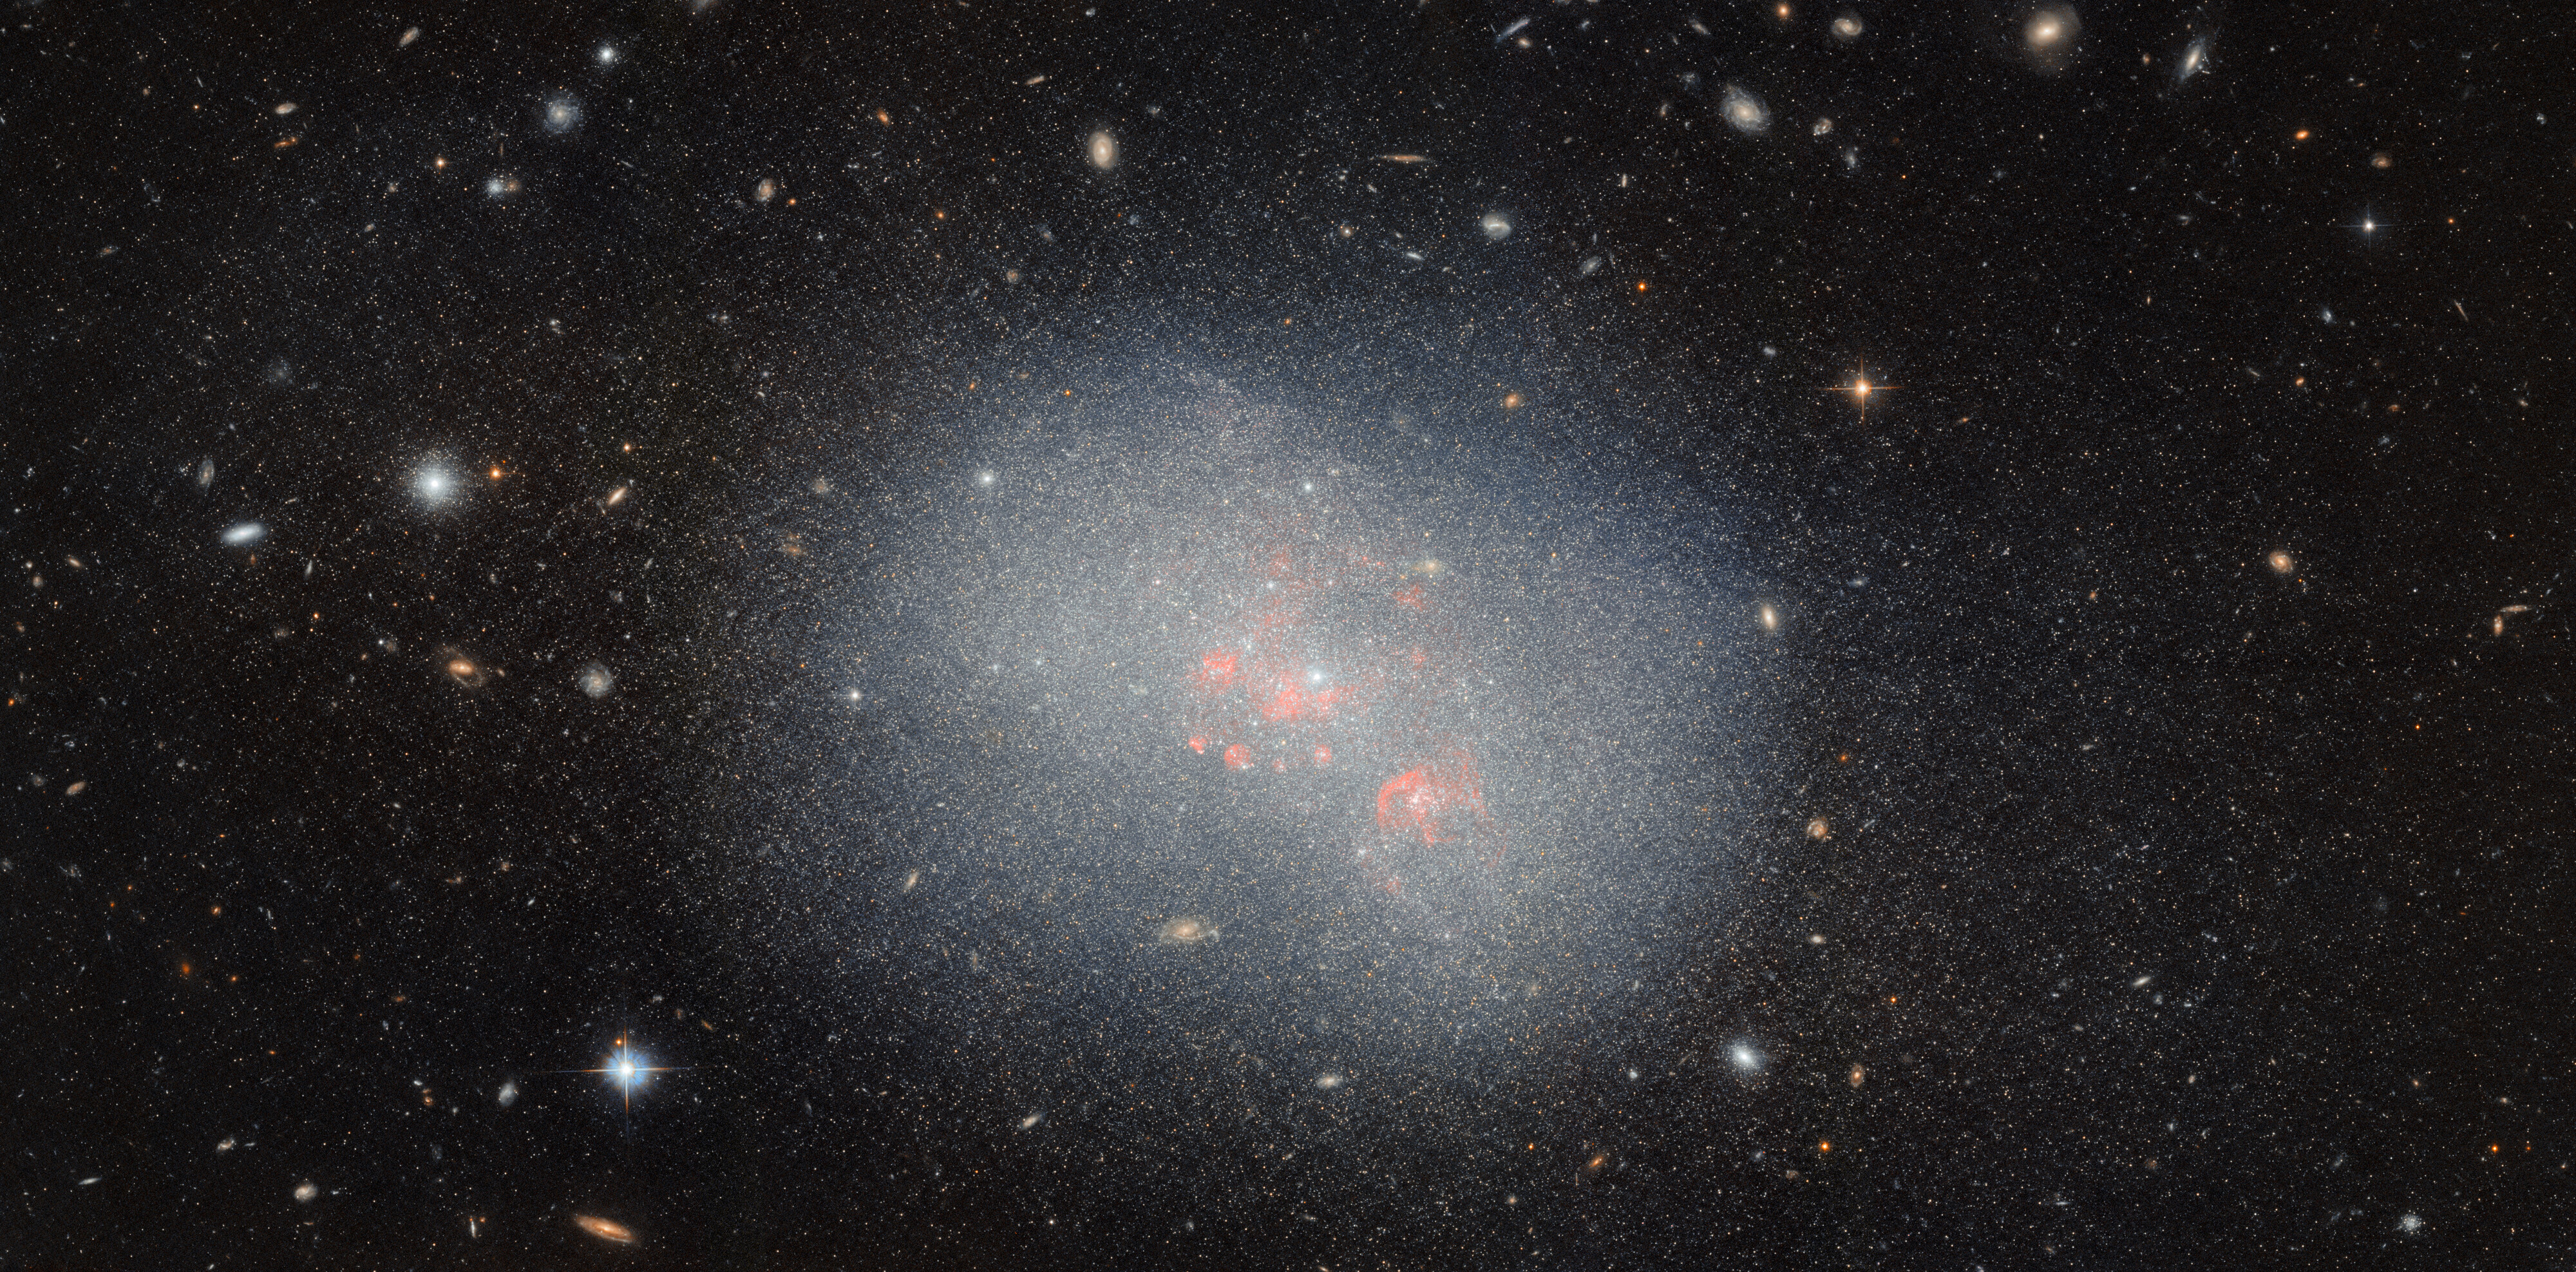 A dwarf irregular galaxy. It appears as a cloud of bluish gas, filled with point-like stars that spread beyond the edge of the gas. A few glowing red clouds sit near its center. Many other objects are visible around it: distant galaxies in the background, four-pointed stars in the foreground, and star clusters that are part of the galaxy appear as bright spots surrounded by more tiny stars.